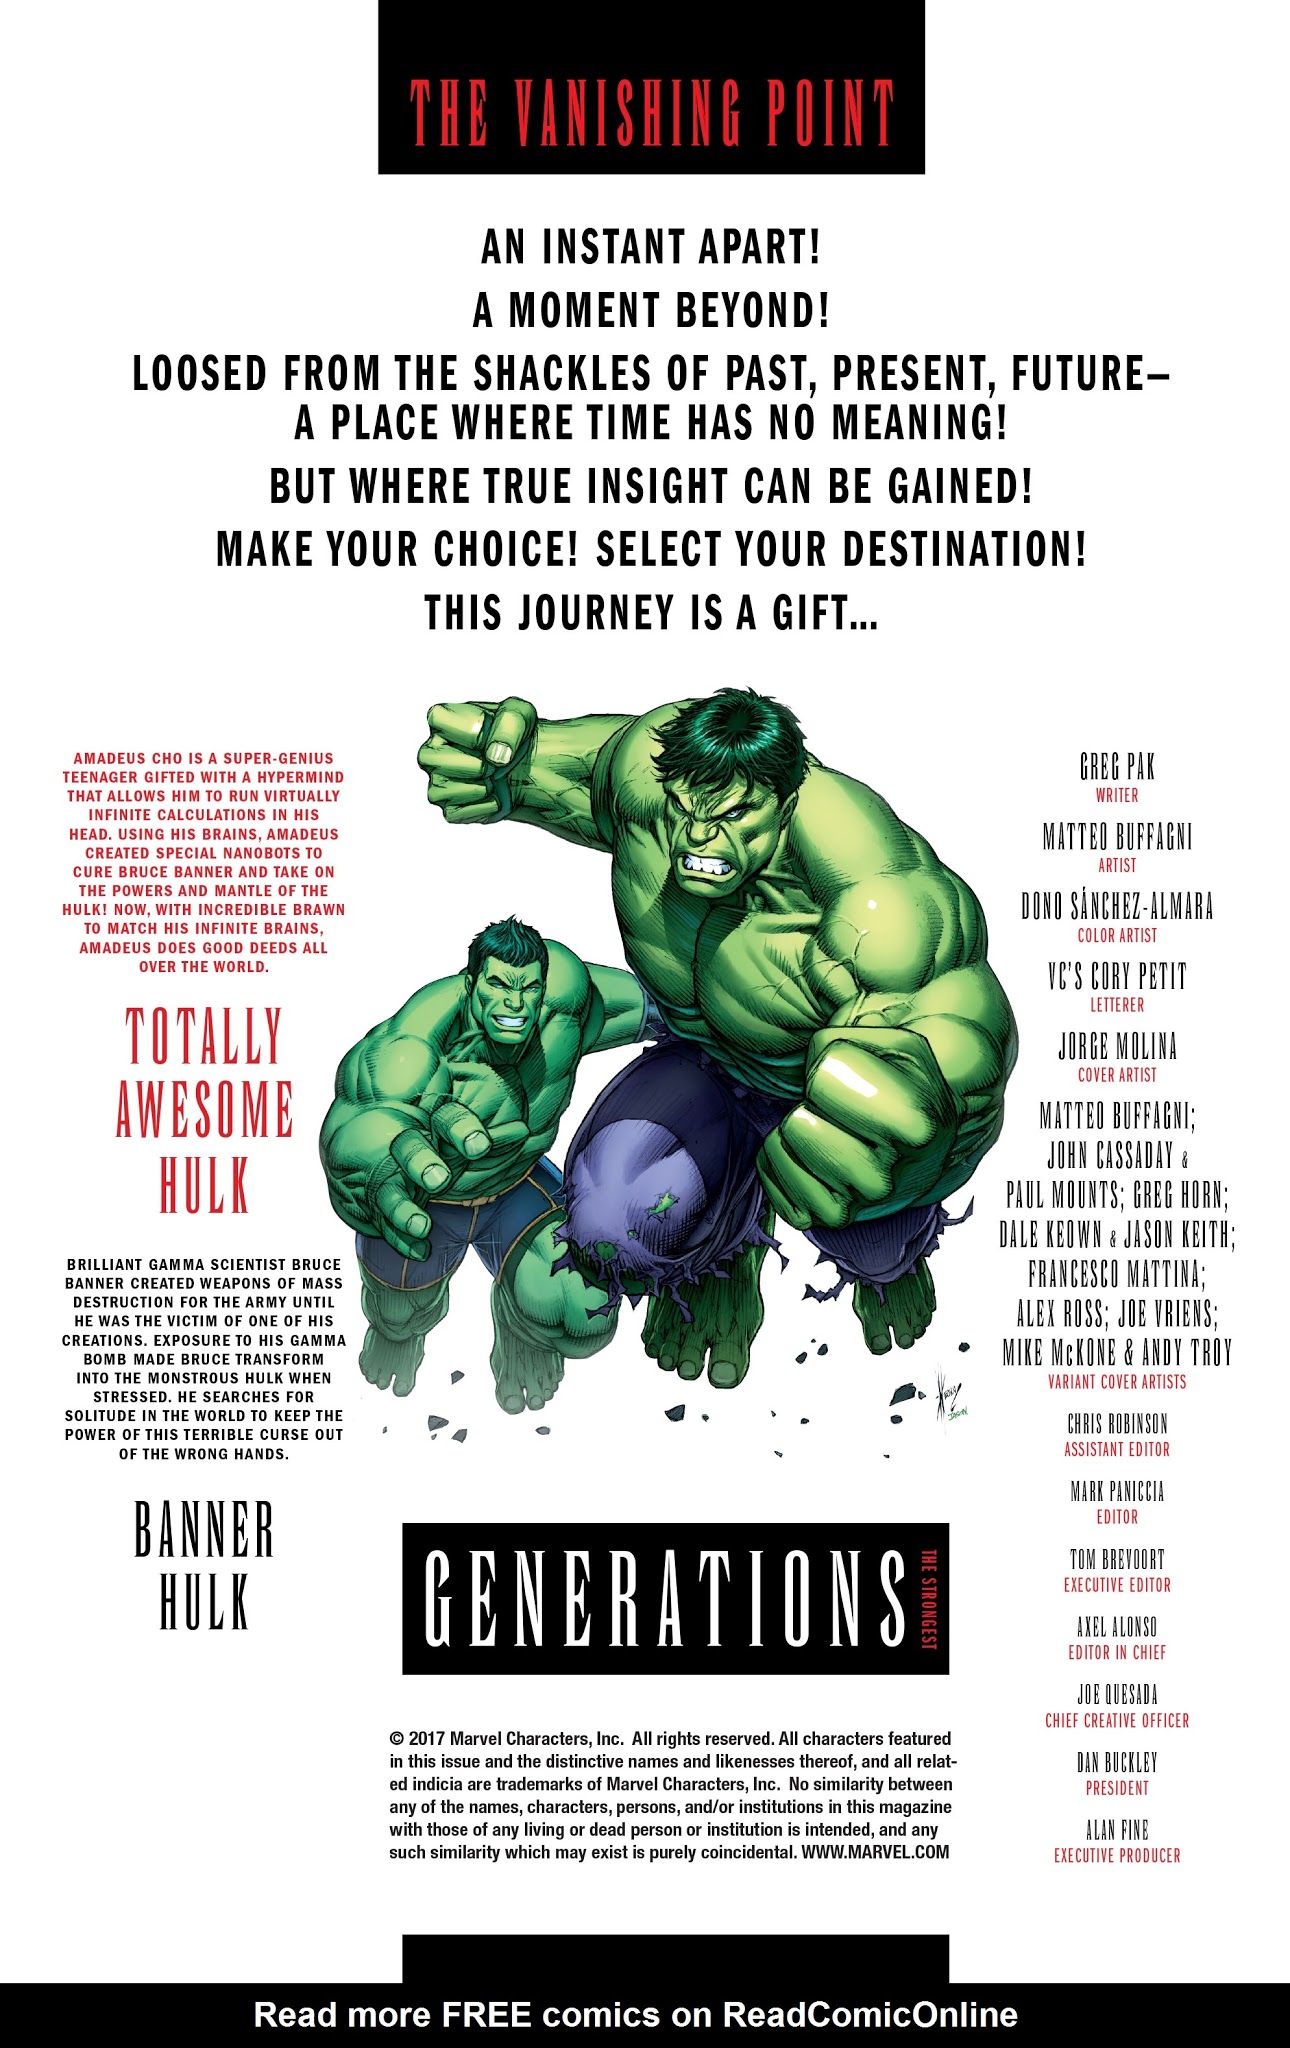 Read online Generations: Banner Hulk & The Totally Awesome Hulk comic -  Issue # Full - 2